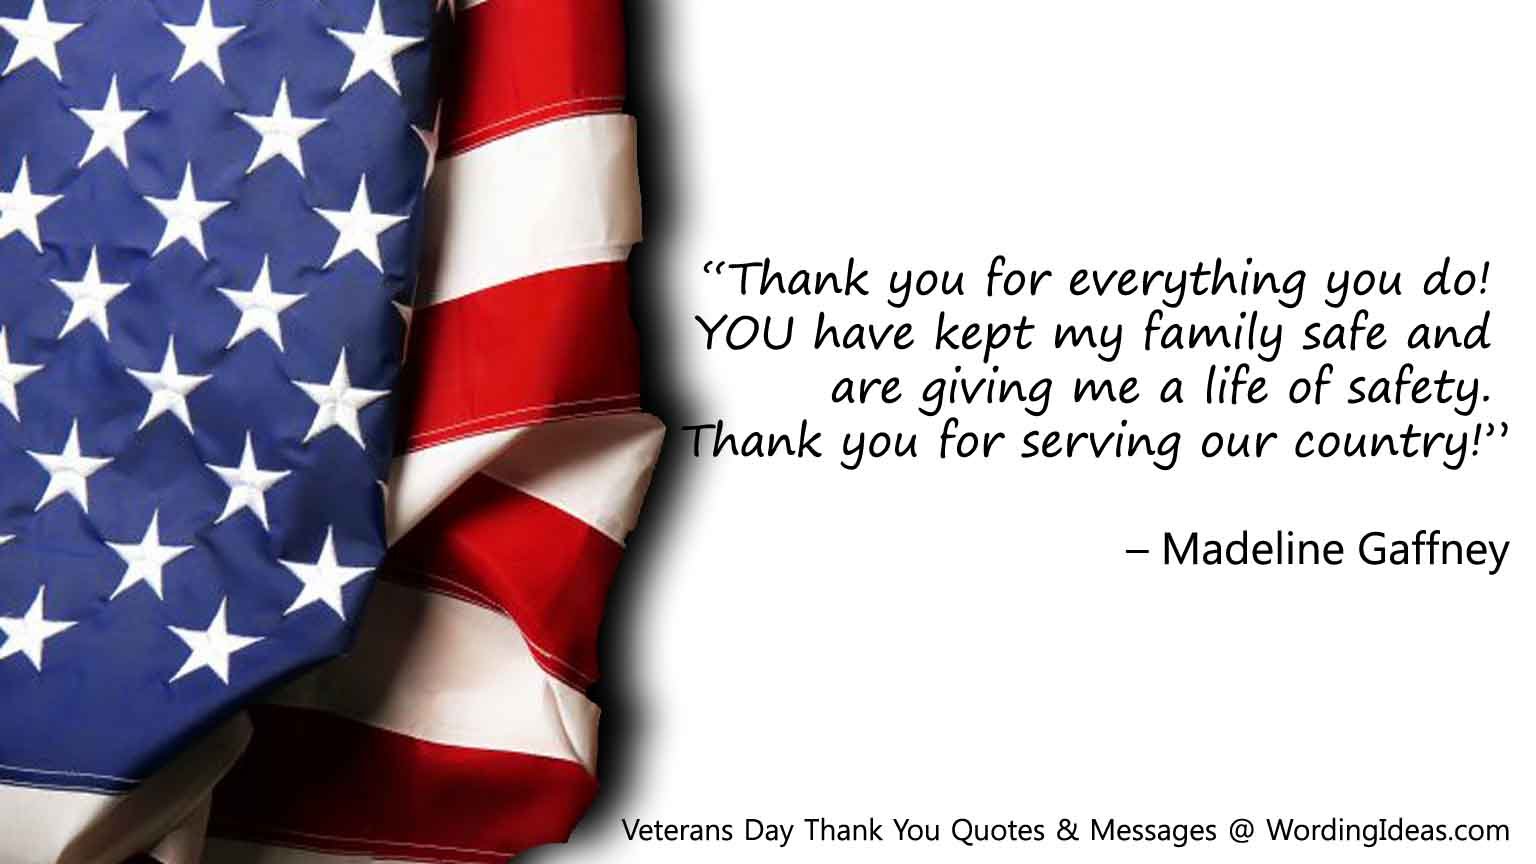 veterans-day-thank-you-quotes